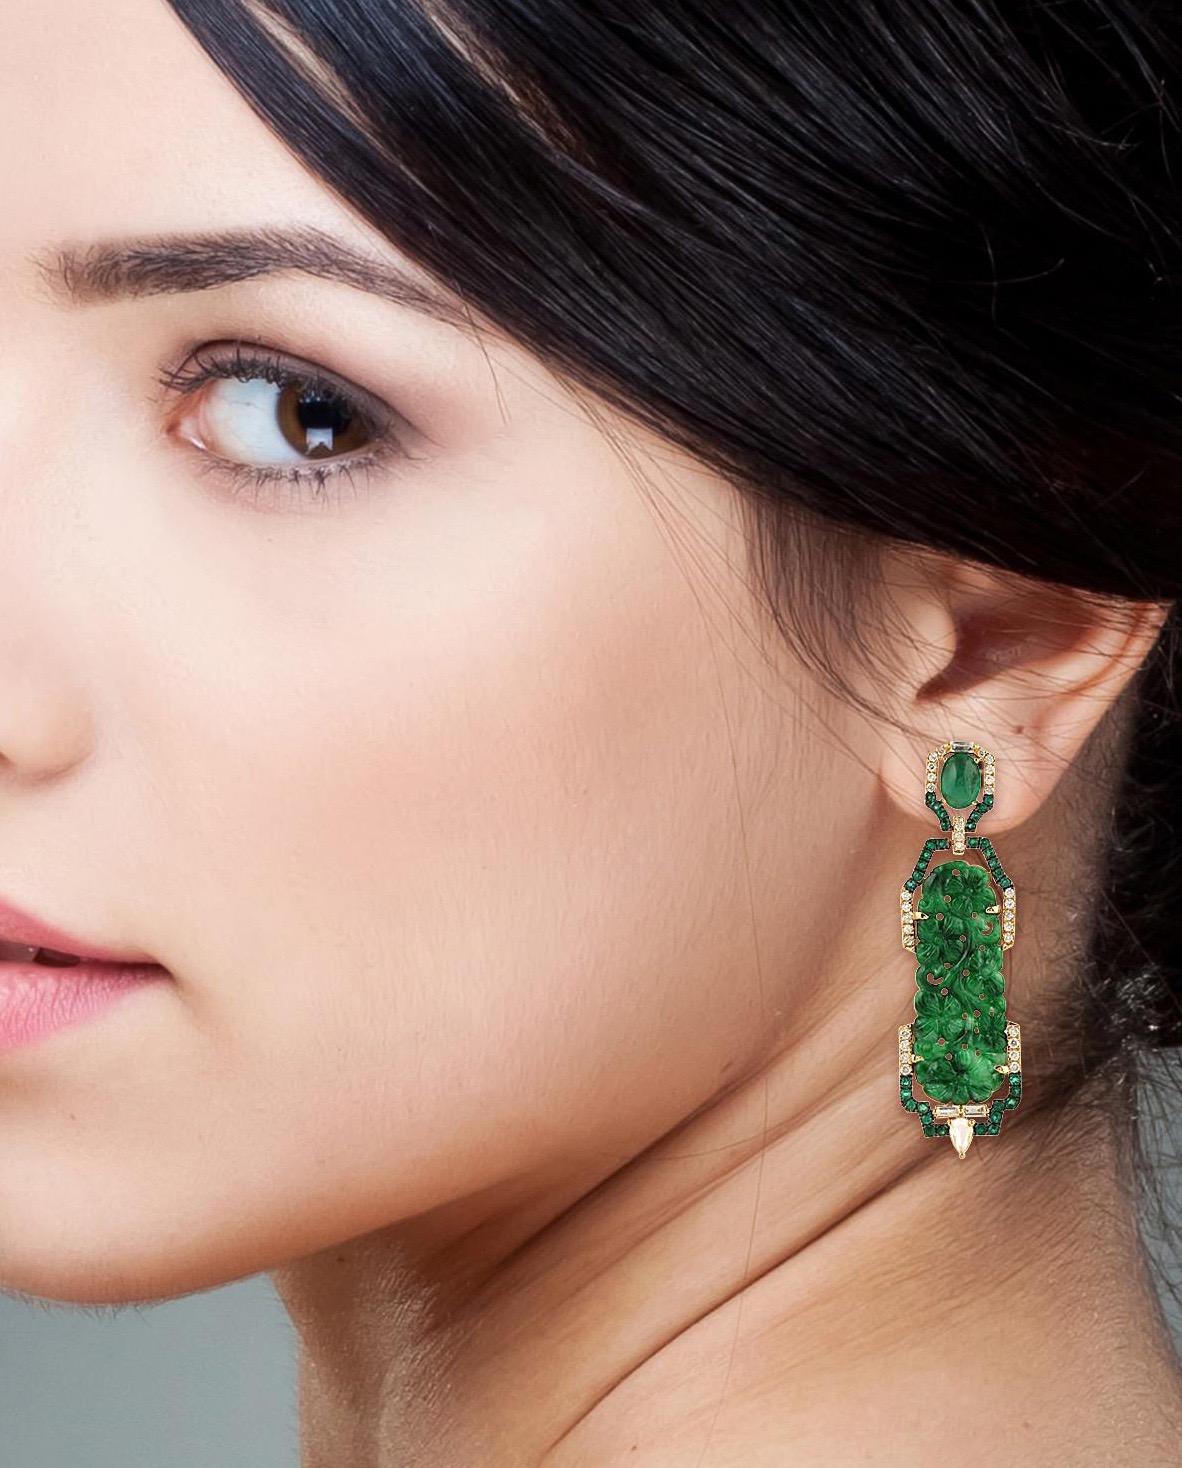 These stunning hand carved Jade earrings are thoughtfully and meticulously crafted in 18-karat gold. It is set in 18.35 carats of Jade, 2.62 carats emerald and 1.02-carats of glimmering diamonds.

FOLLOW  MEGHNA JEWELS storefront to view the latest